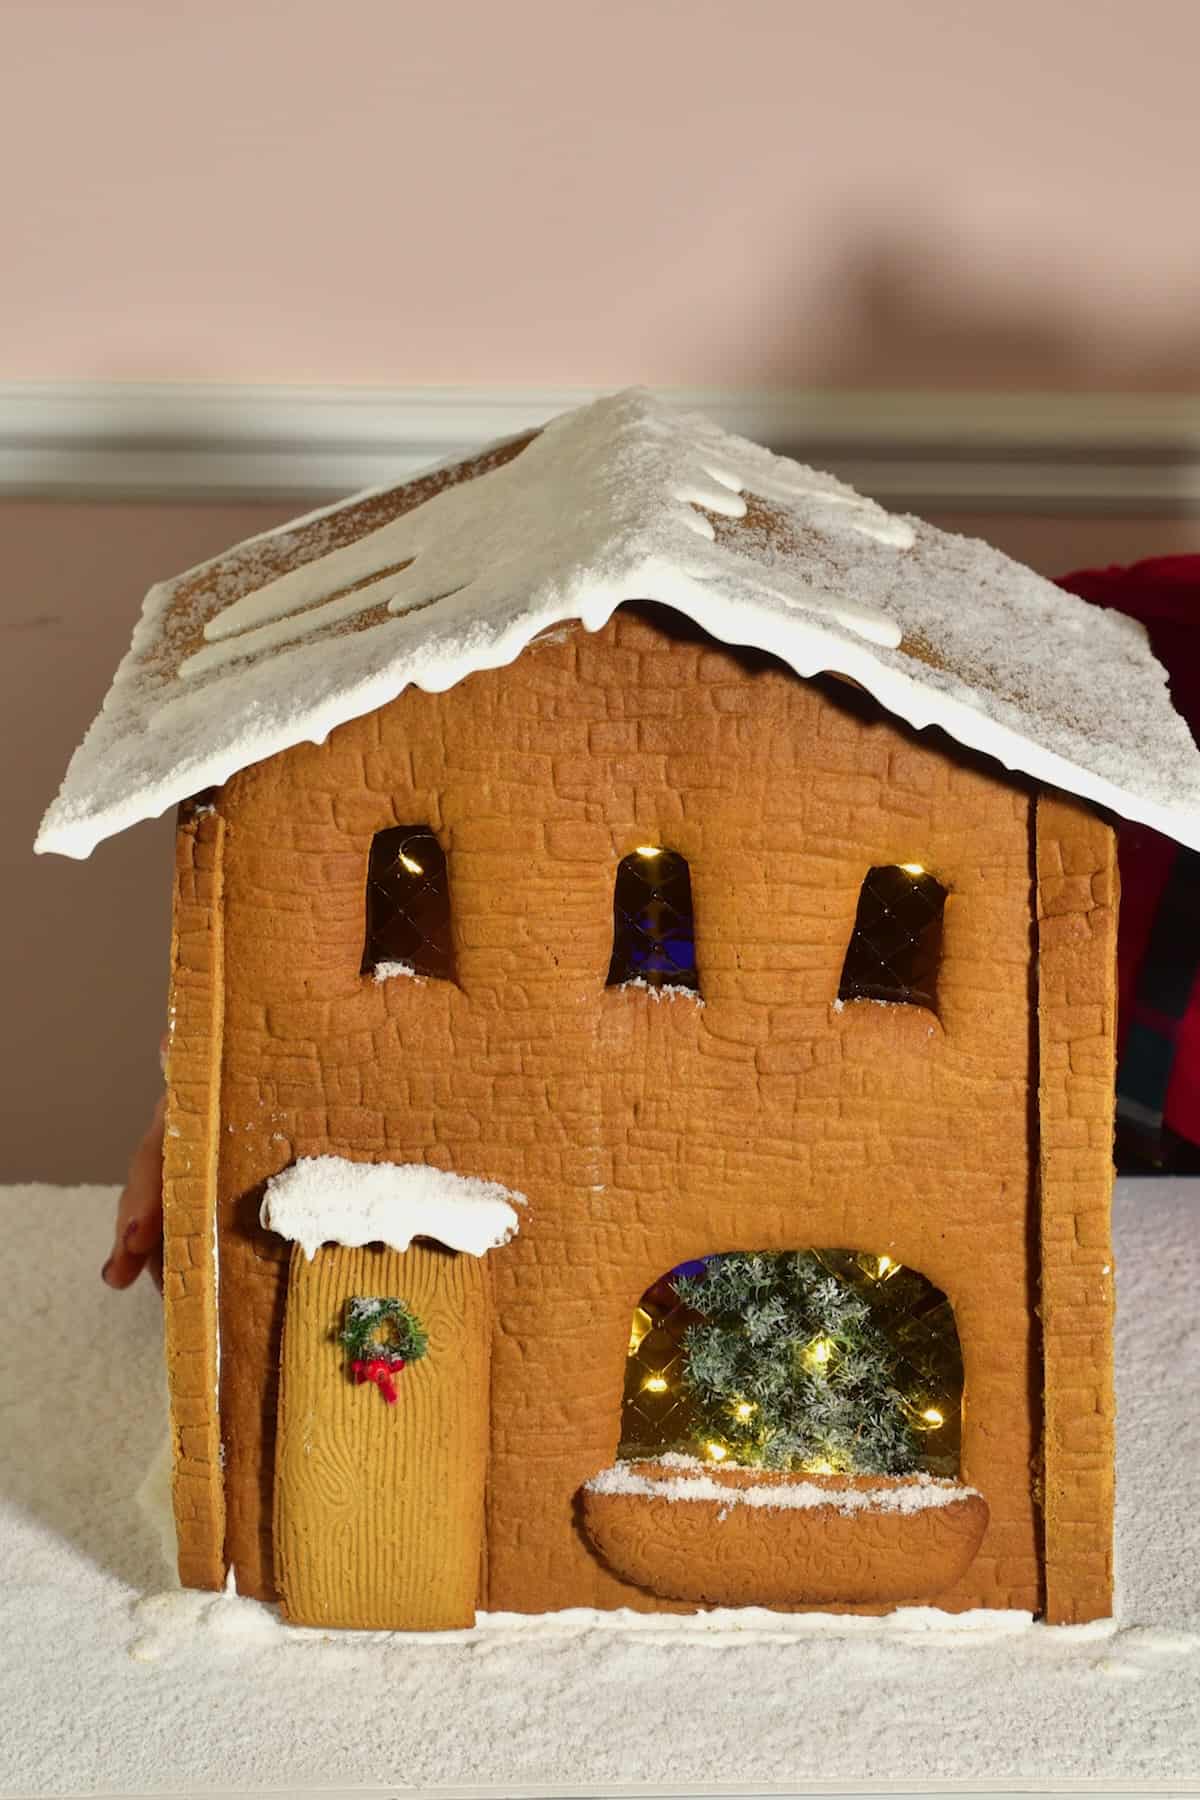 Homemade decorated gingerbread house